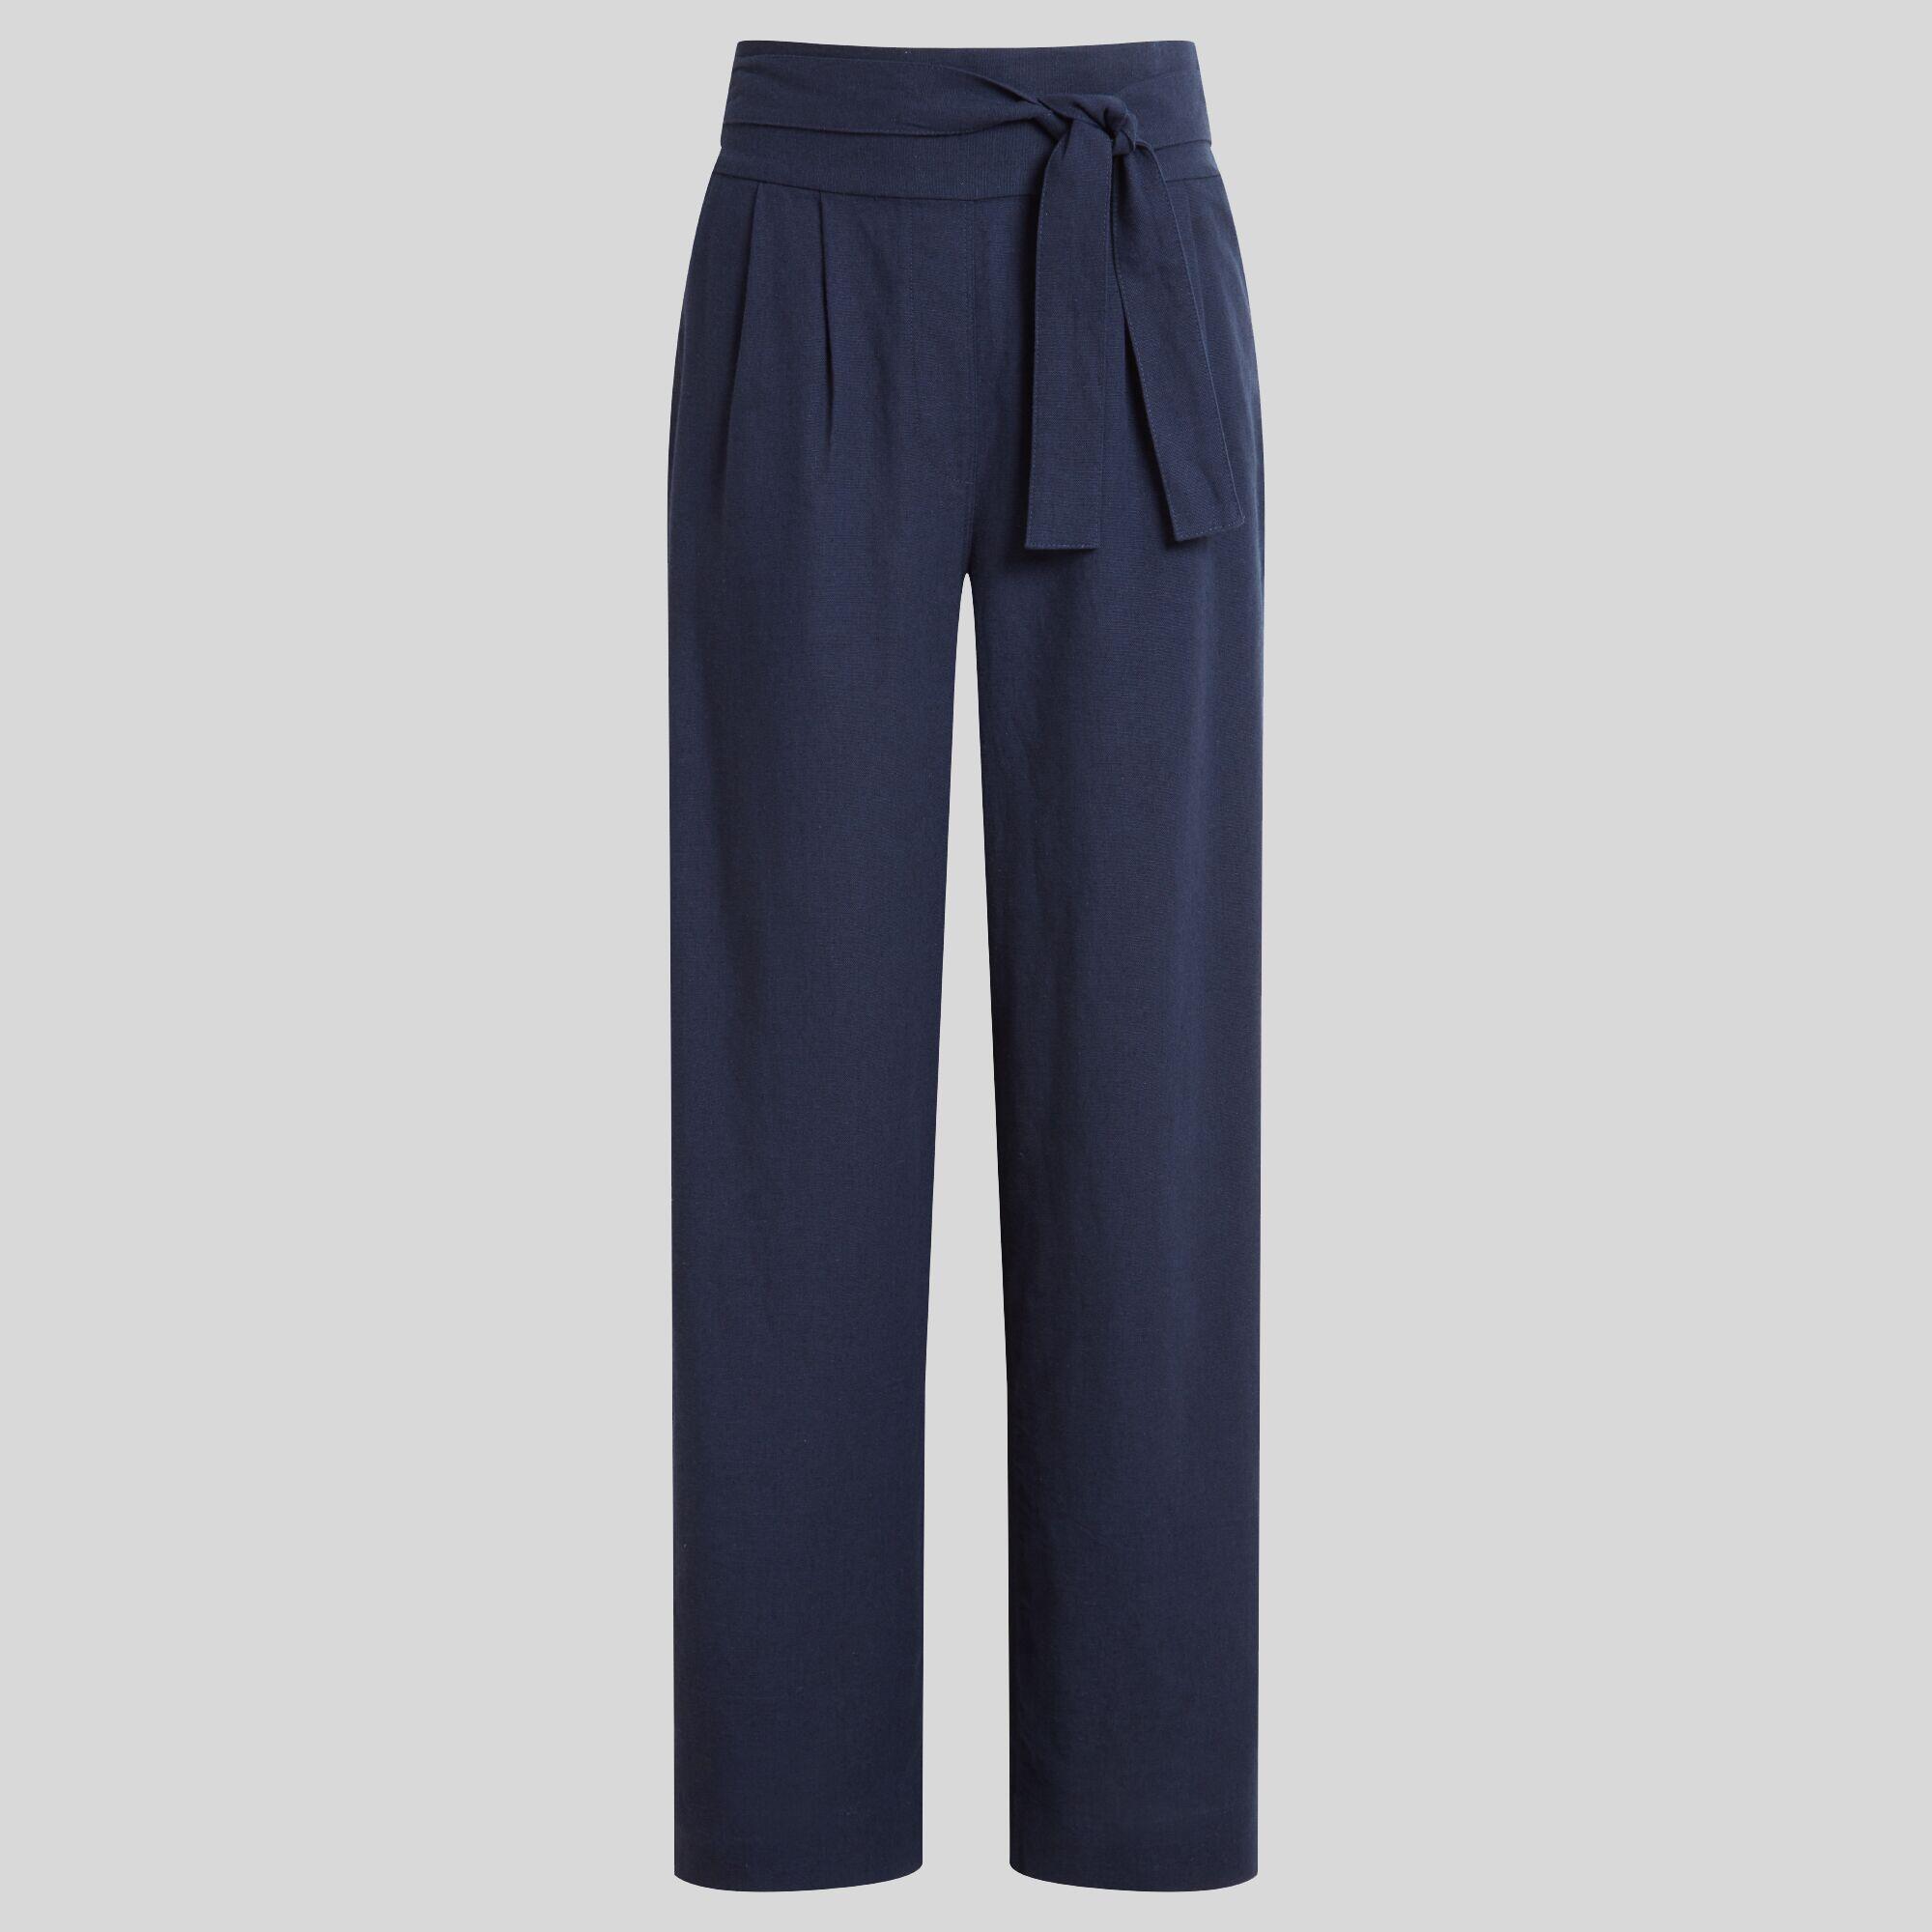 CRAGHOPPERS Womens Ophelia Trouser